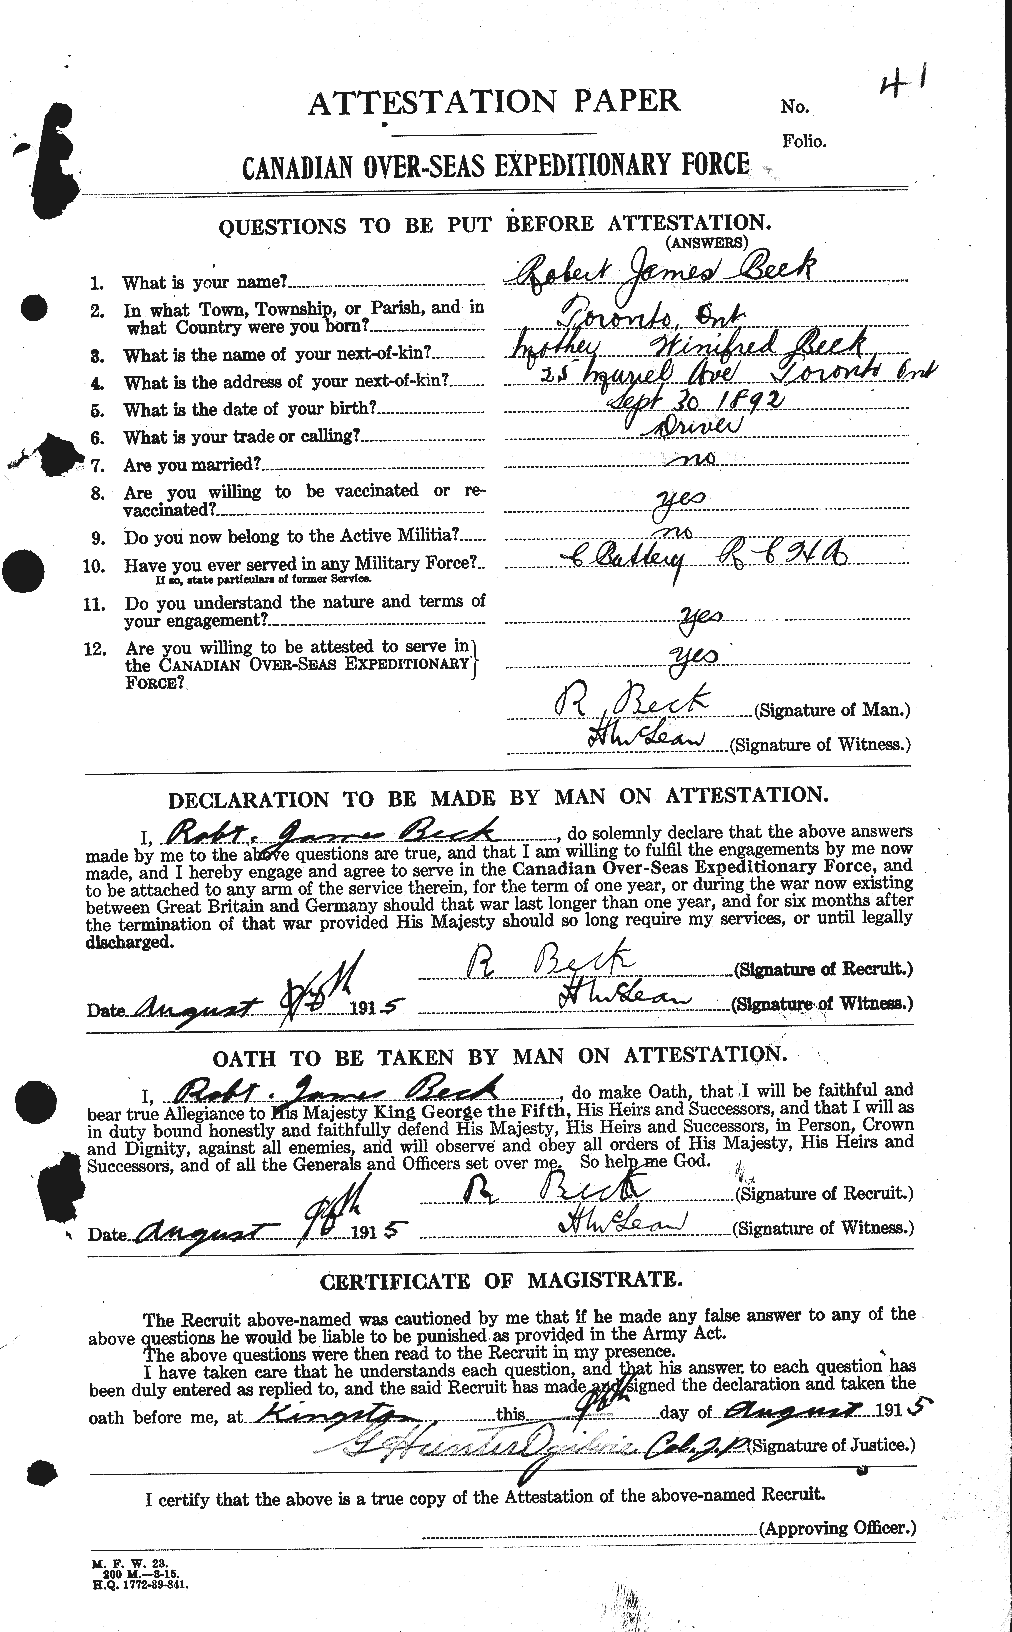 Personnel Records of the First World War - CEF 241466a